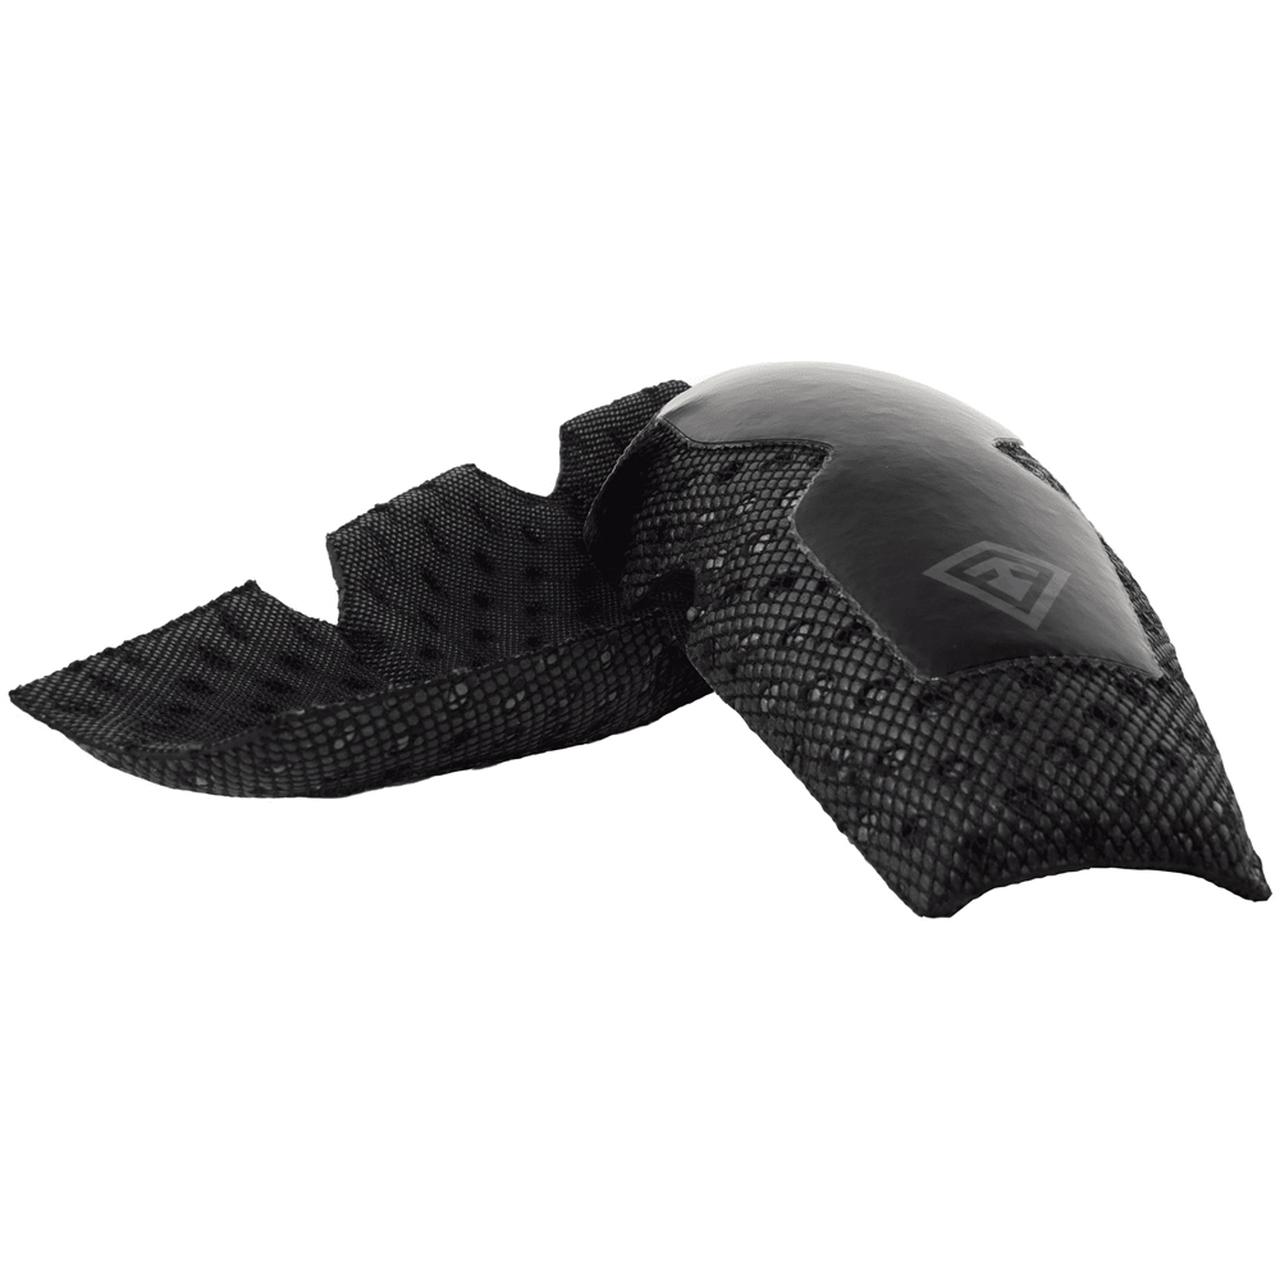 First Tactical Defender Elbow Pad, Black